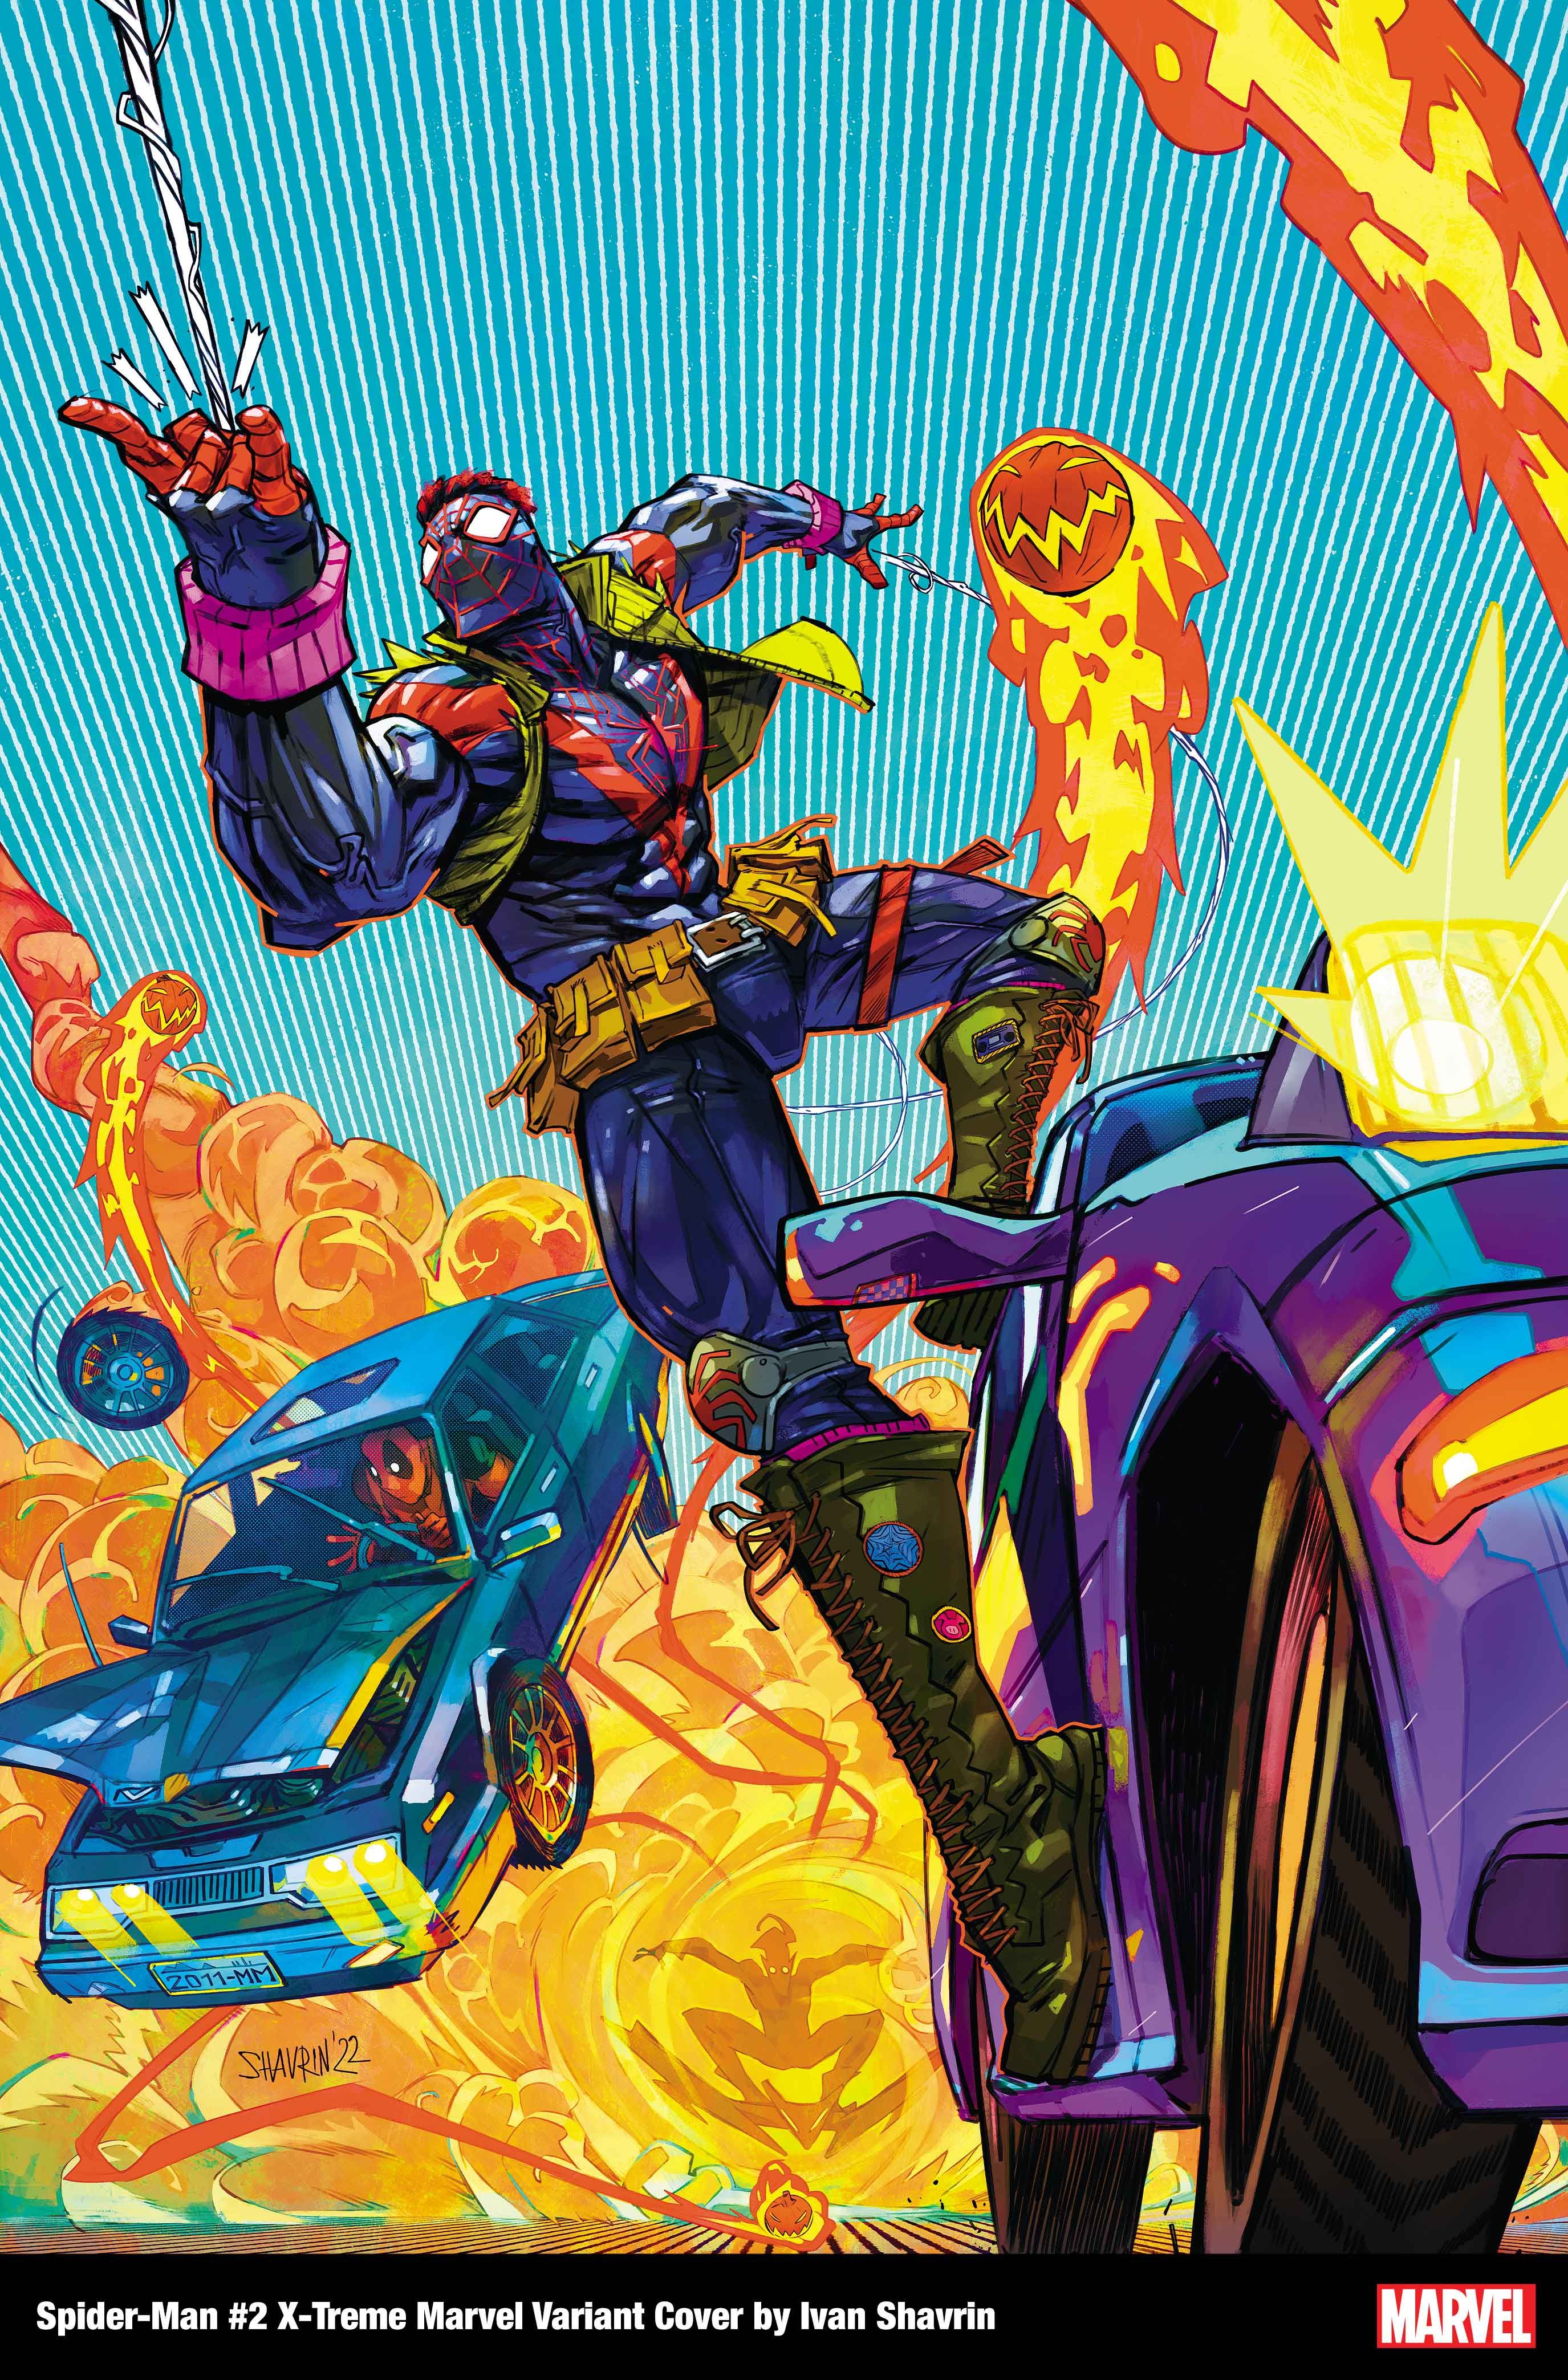 Marvel Goes X-Treme In '90s Throwback Variant Cover Series